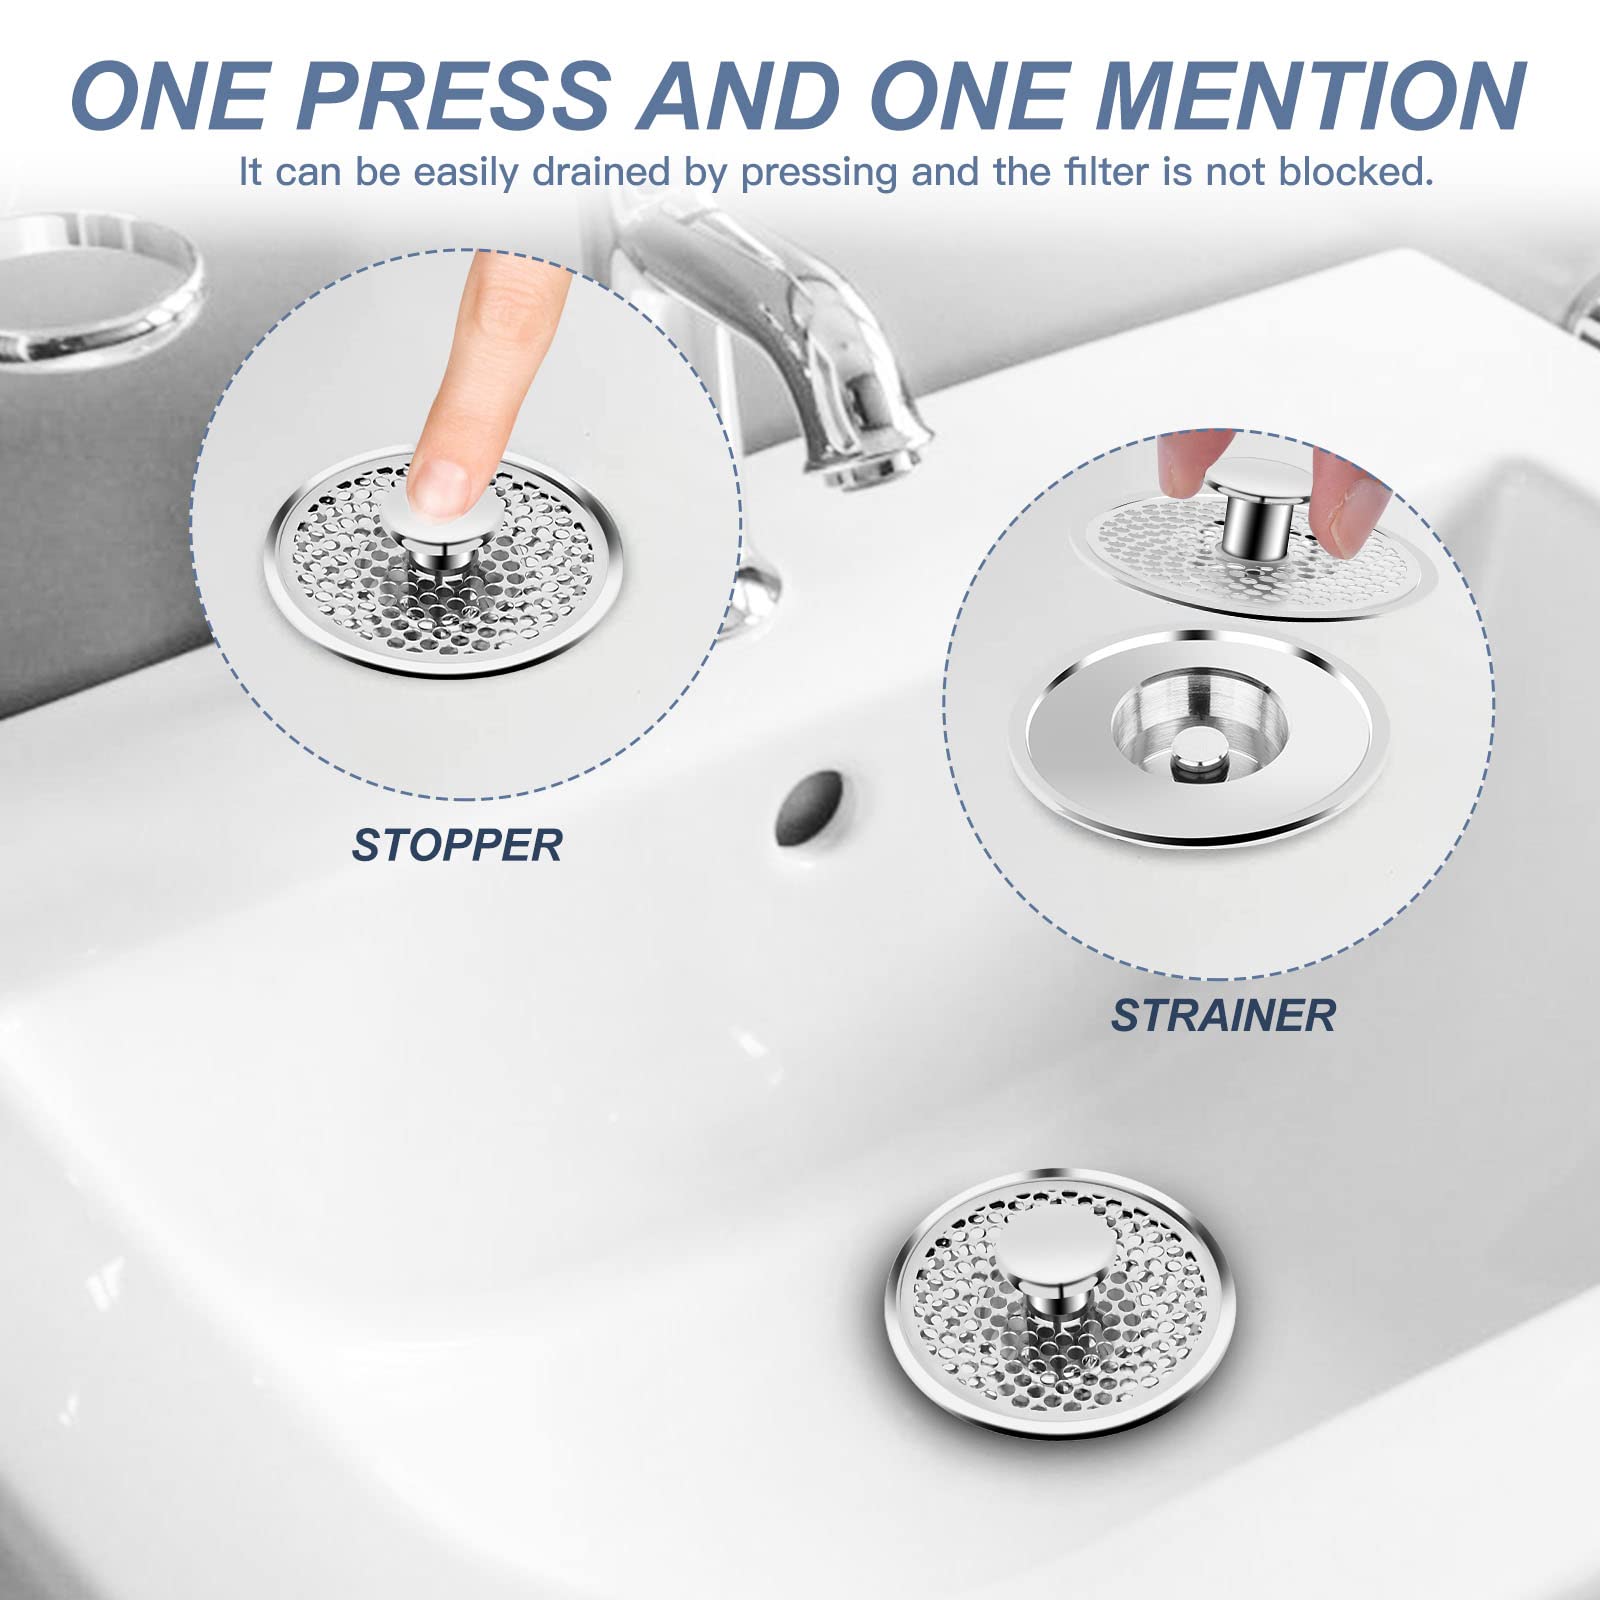 Universal 1.06~1.26 Inch Stainless Steel Bathroom Sink Stopper Anti Clogging Bathtub Drain Stopper with Filter Basket, Bounce Bullet Type Sink Plug for 1-1/4'' Sink Drain